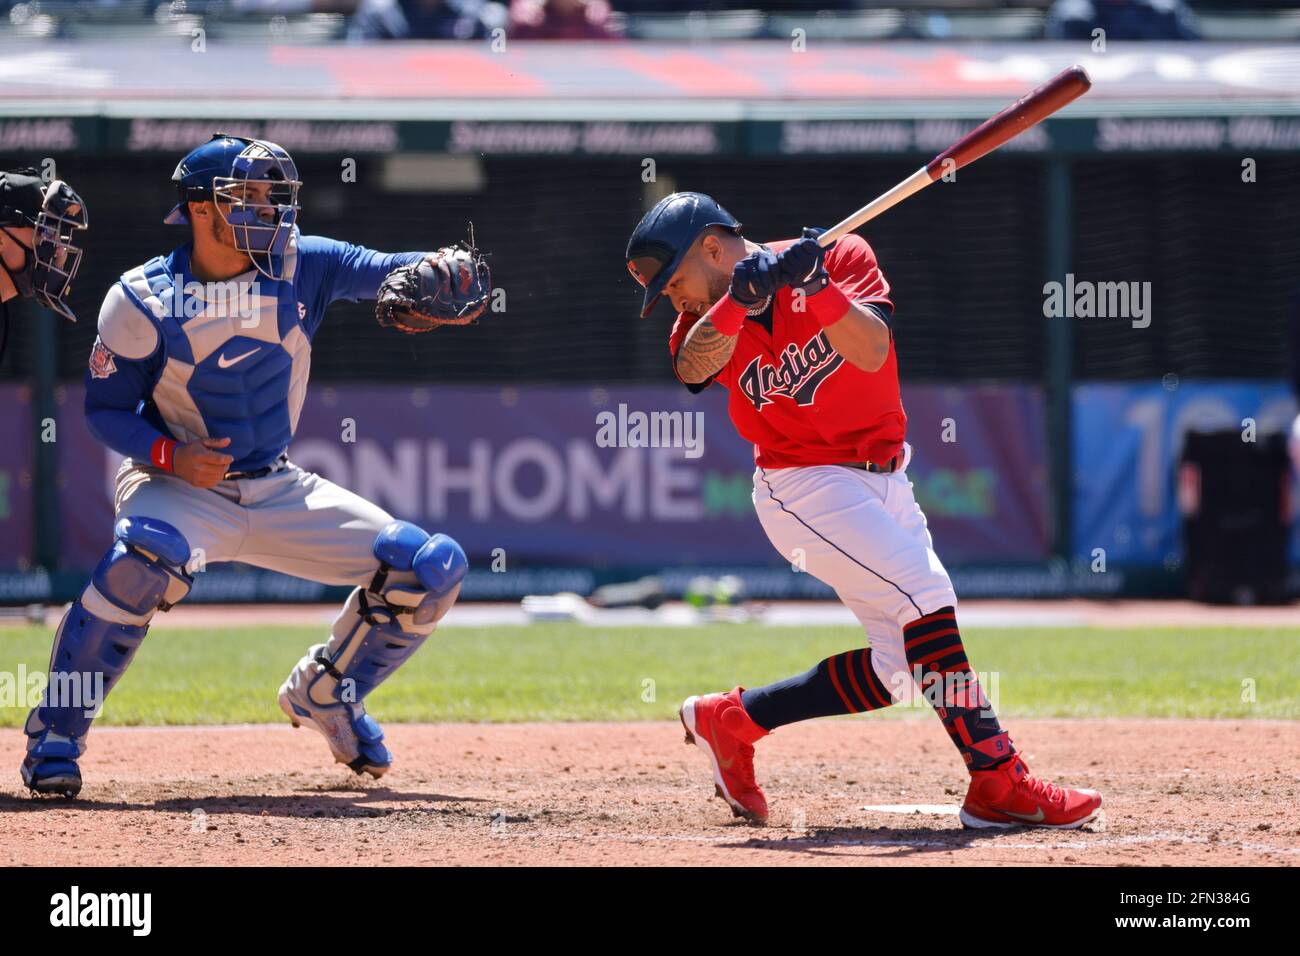 CLEVELAND, OH - MAY 12: Eddie Rosario (9) of the Cleveland Indians backs away from a tight pitch while batting during a game against the Chicago Cubs Stock Photo